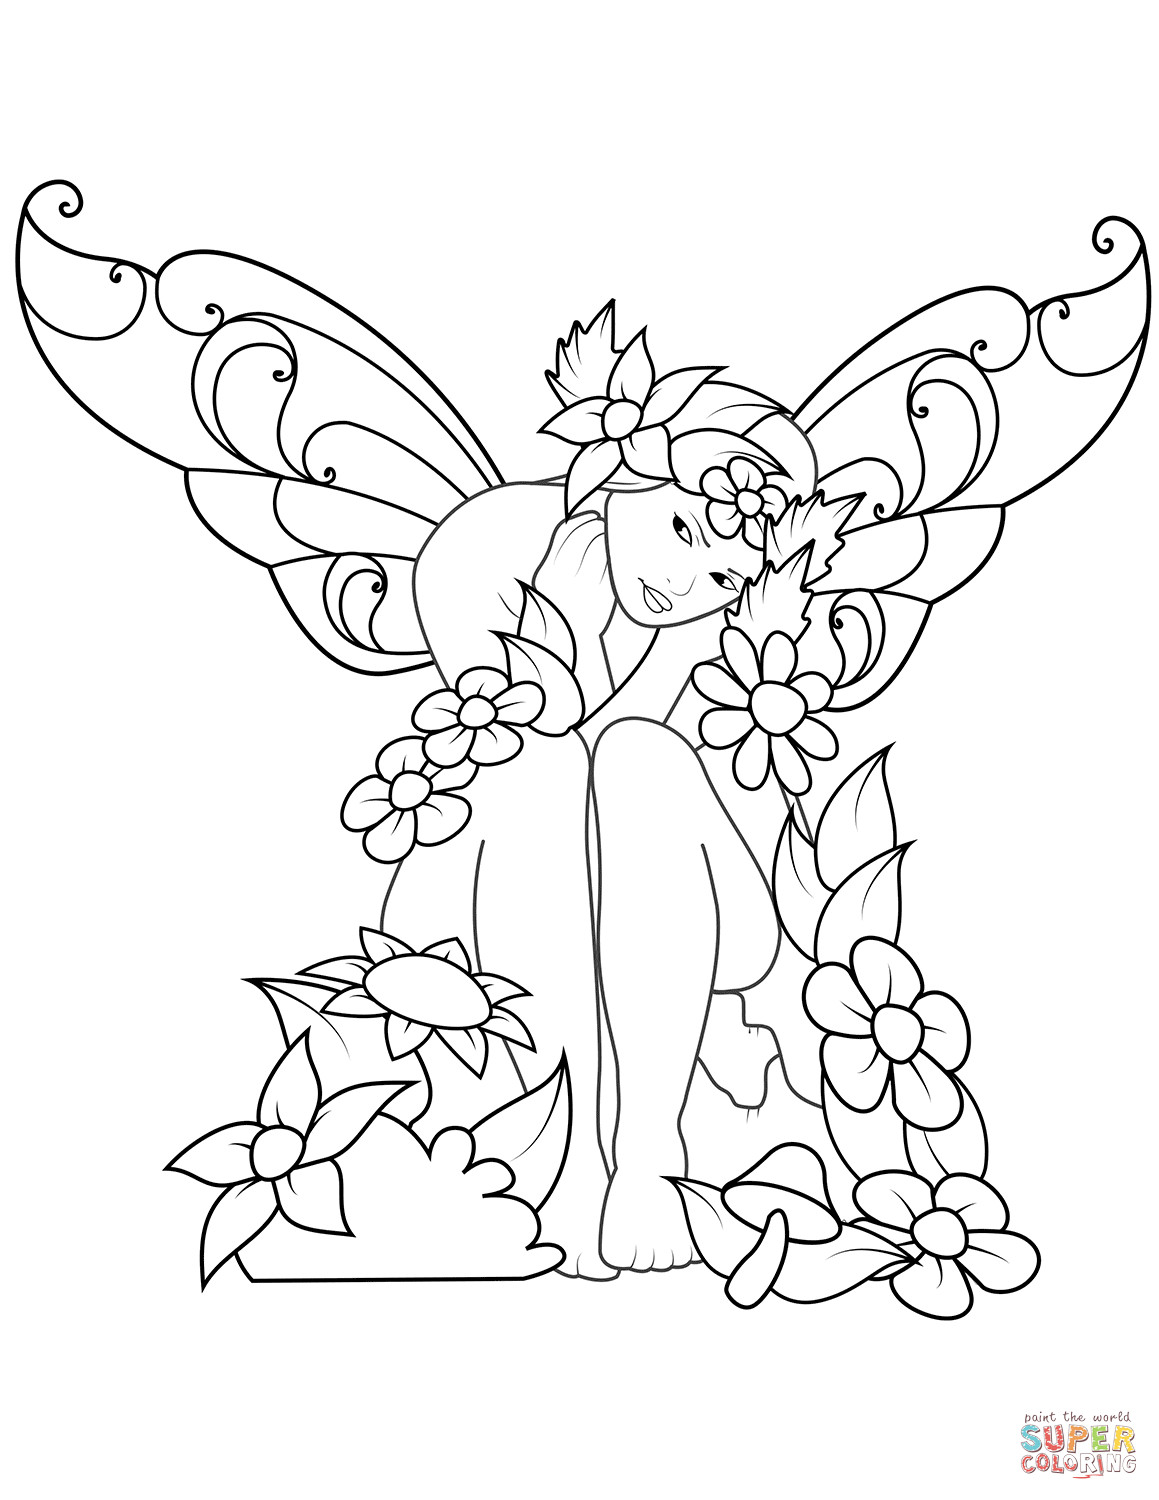 Printable Fairies Coloring Pages
 Sad Fairy coloring page